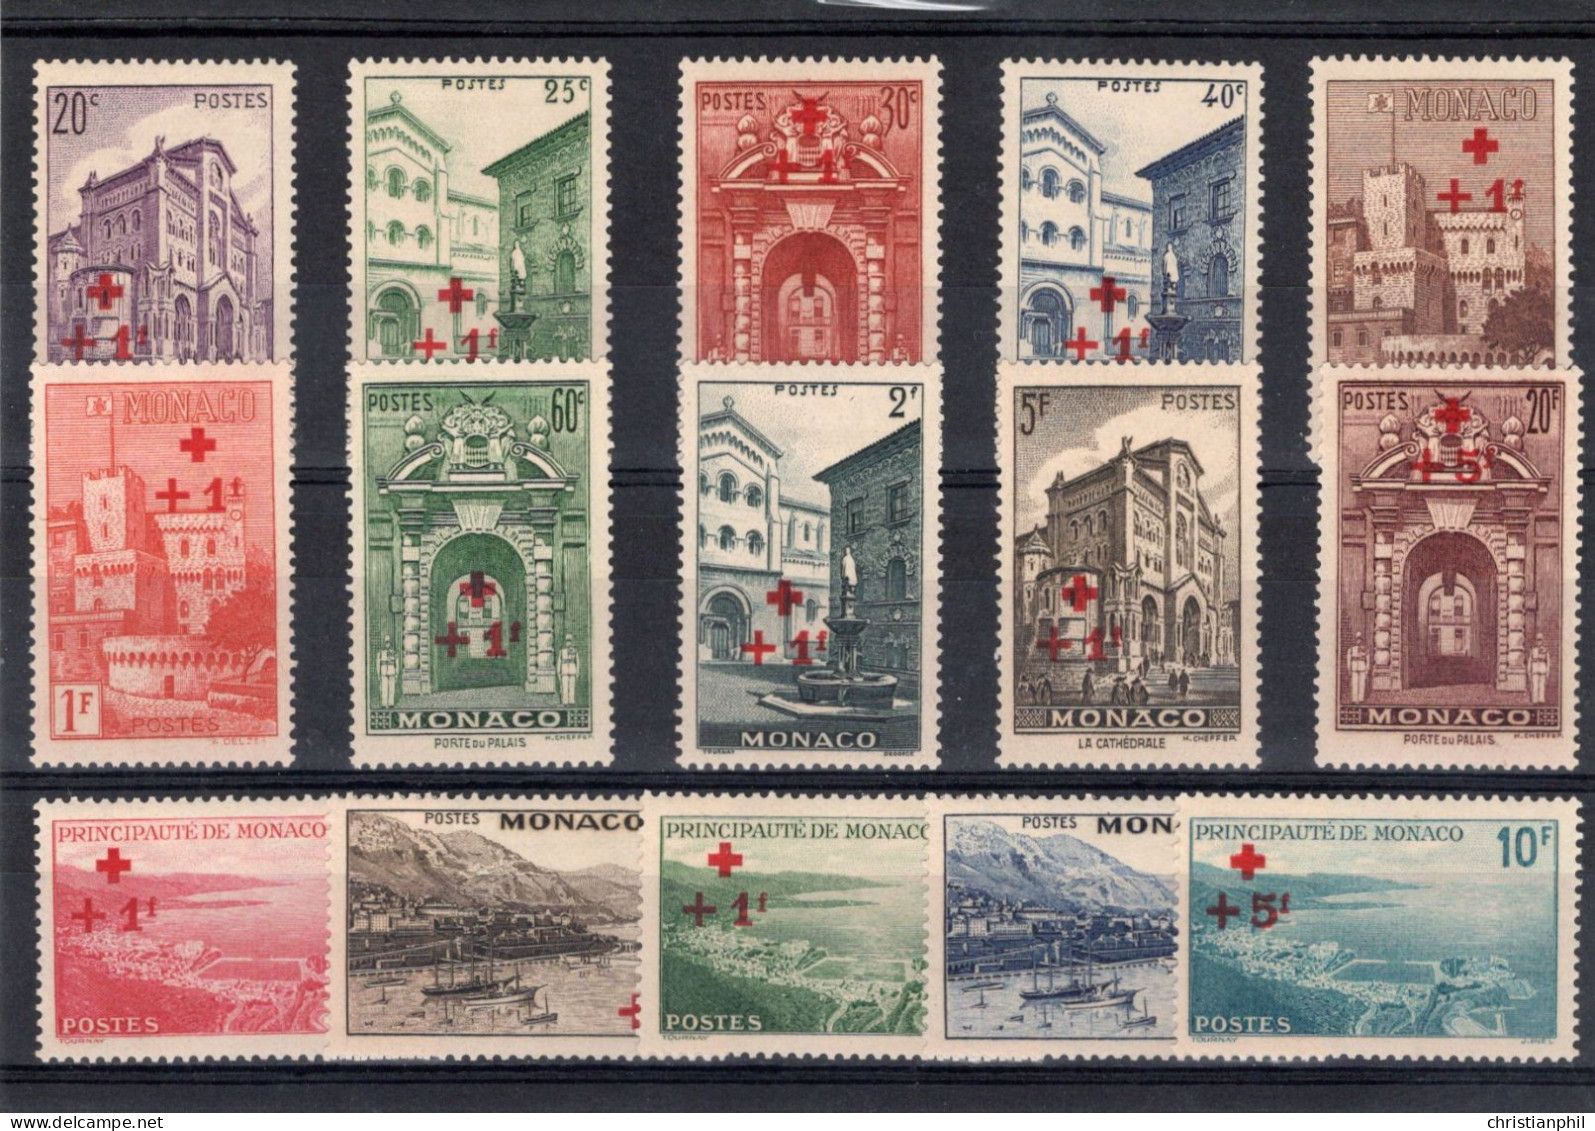 TIMBRES MONACO CROIX-ROUGE  . ANNEE 1940   N° 200 à 214. NEUF * - Nuevos